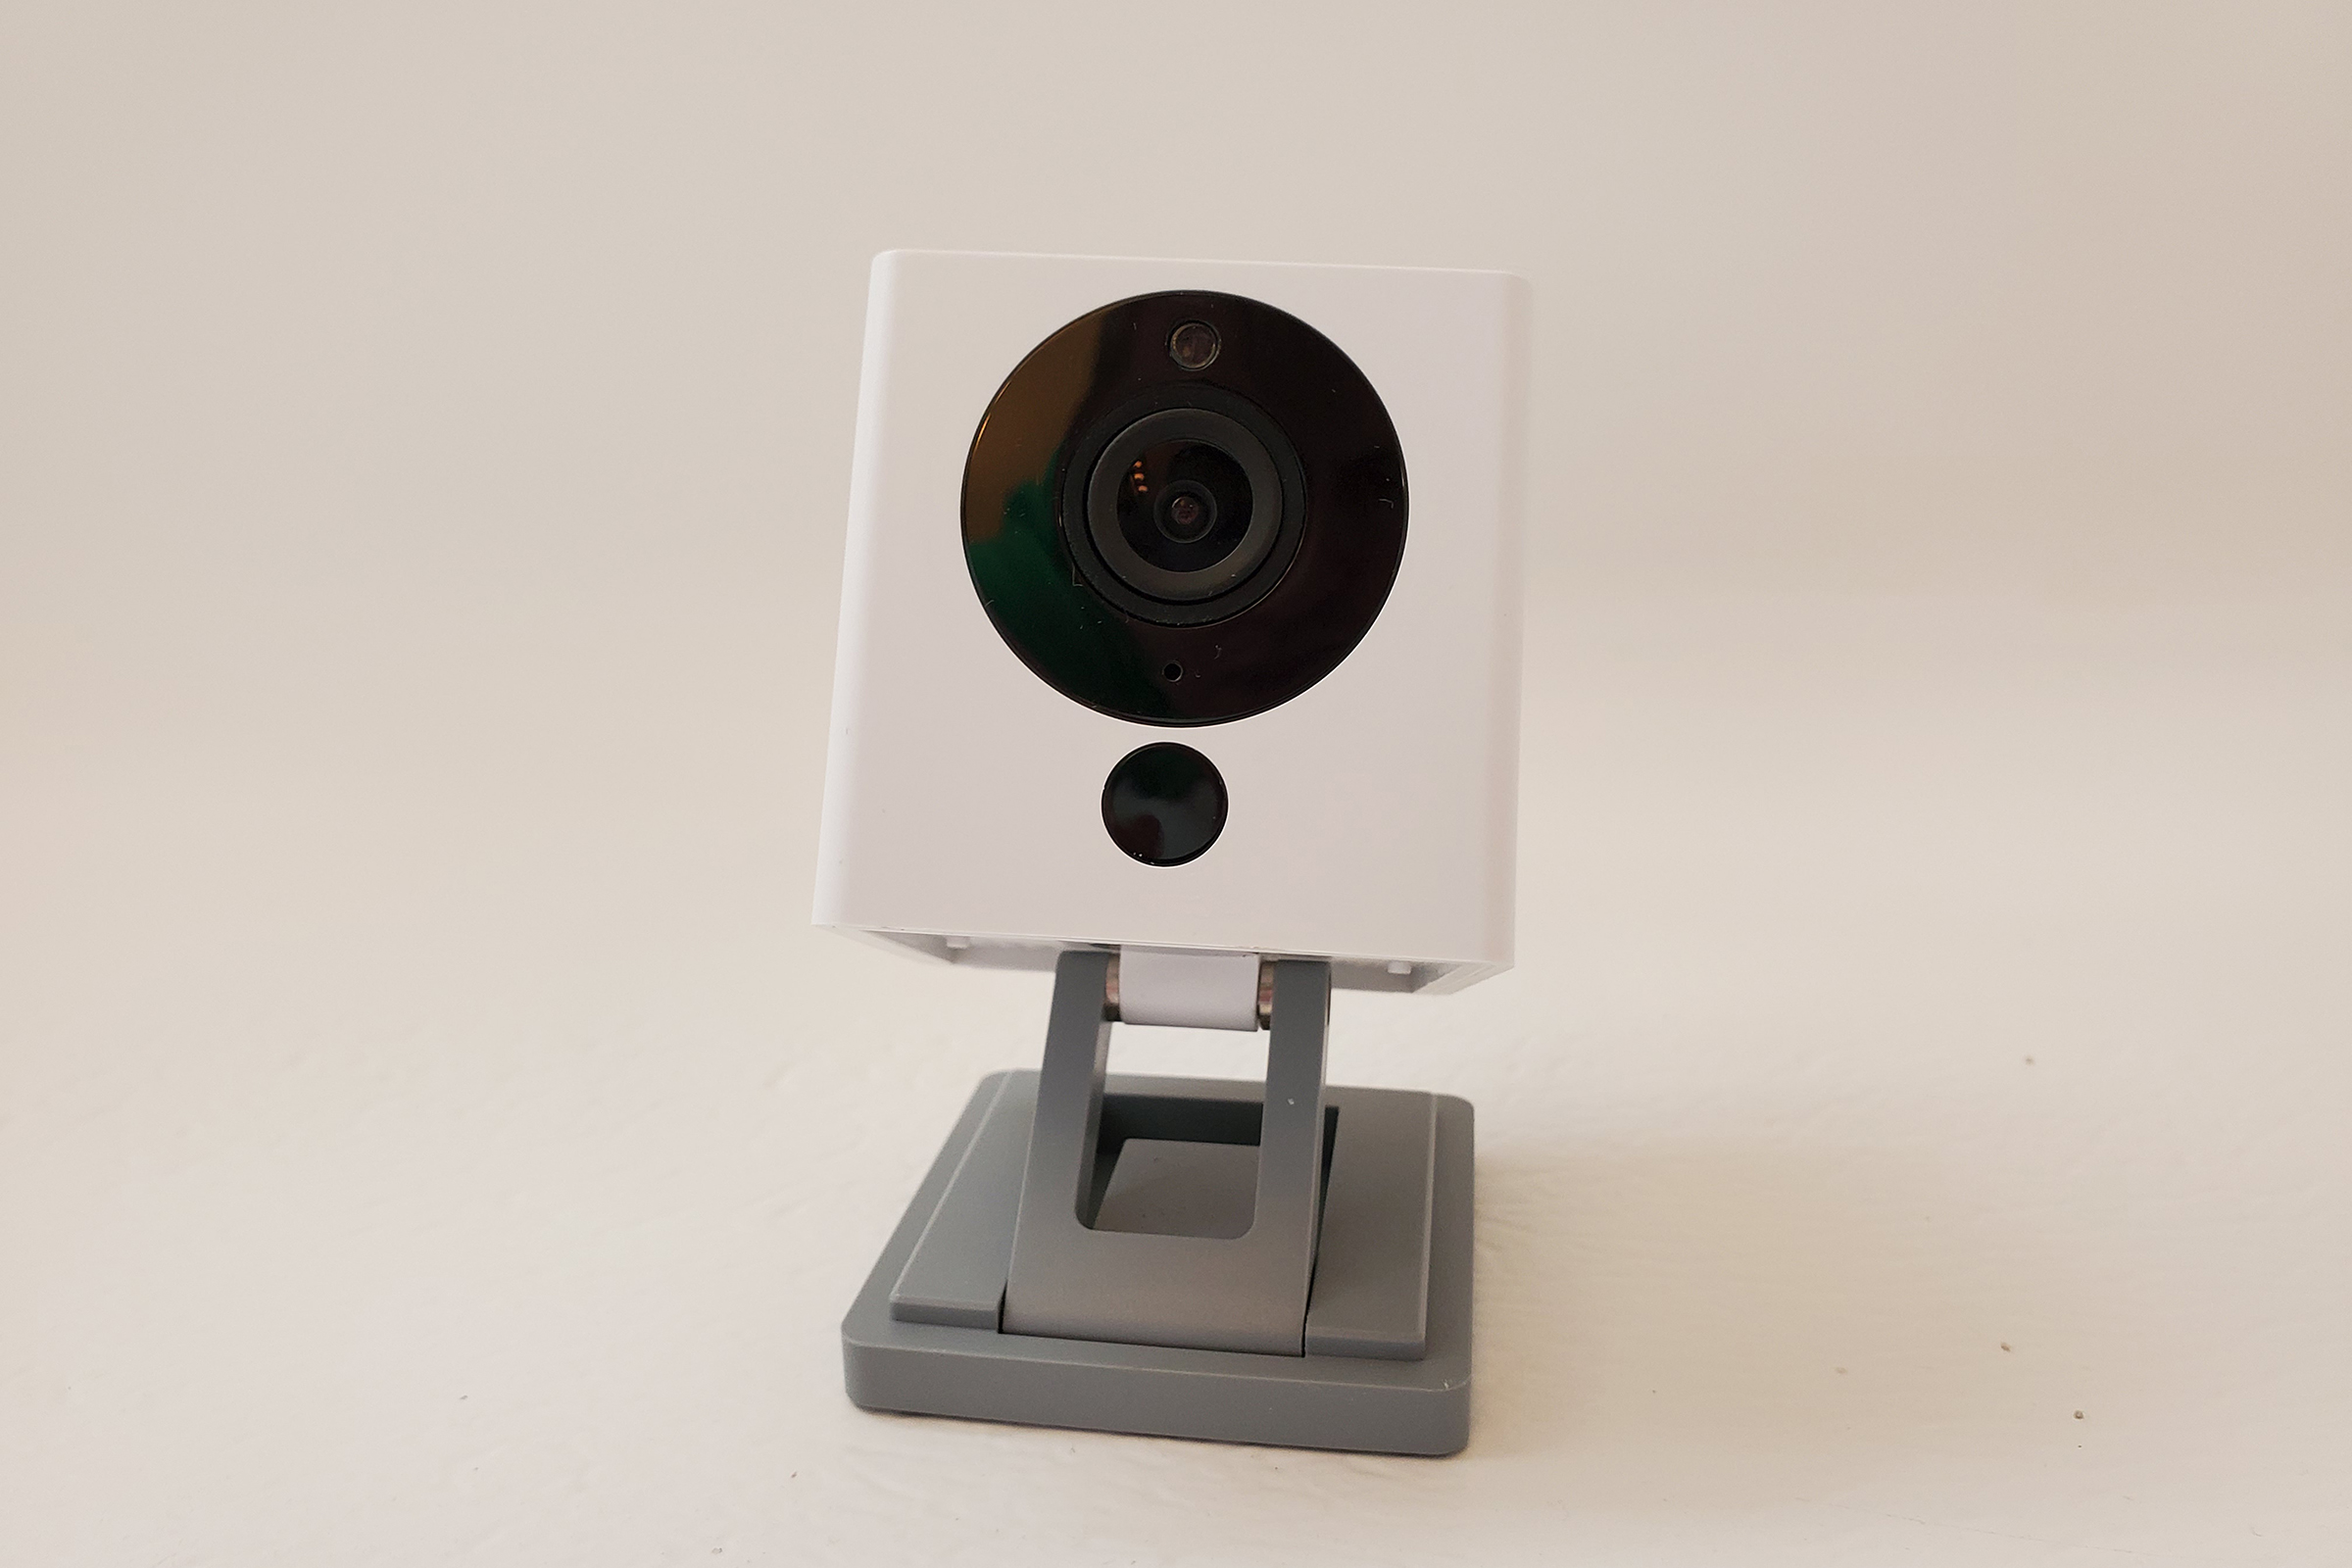 Wyze Cam smart home security camera. (Smith Collection/Getty Images)